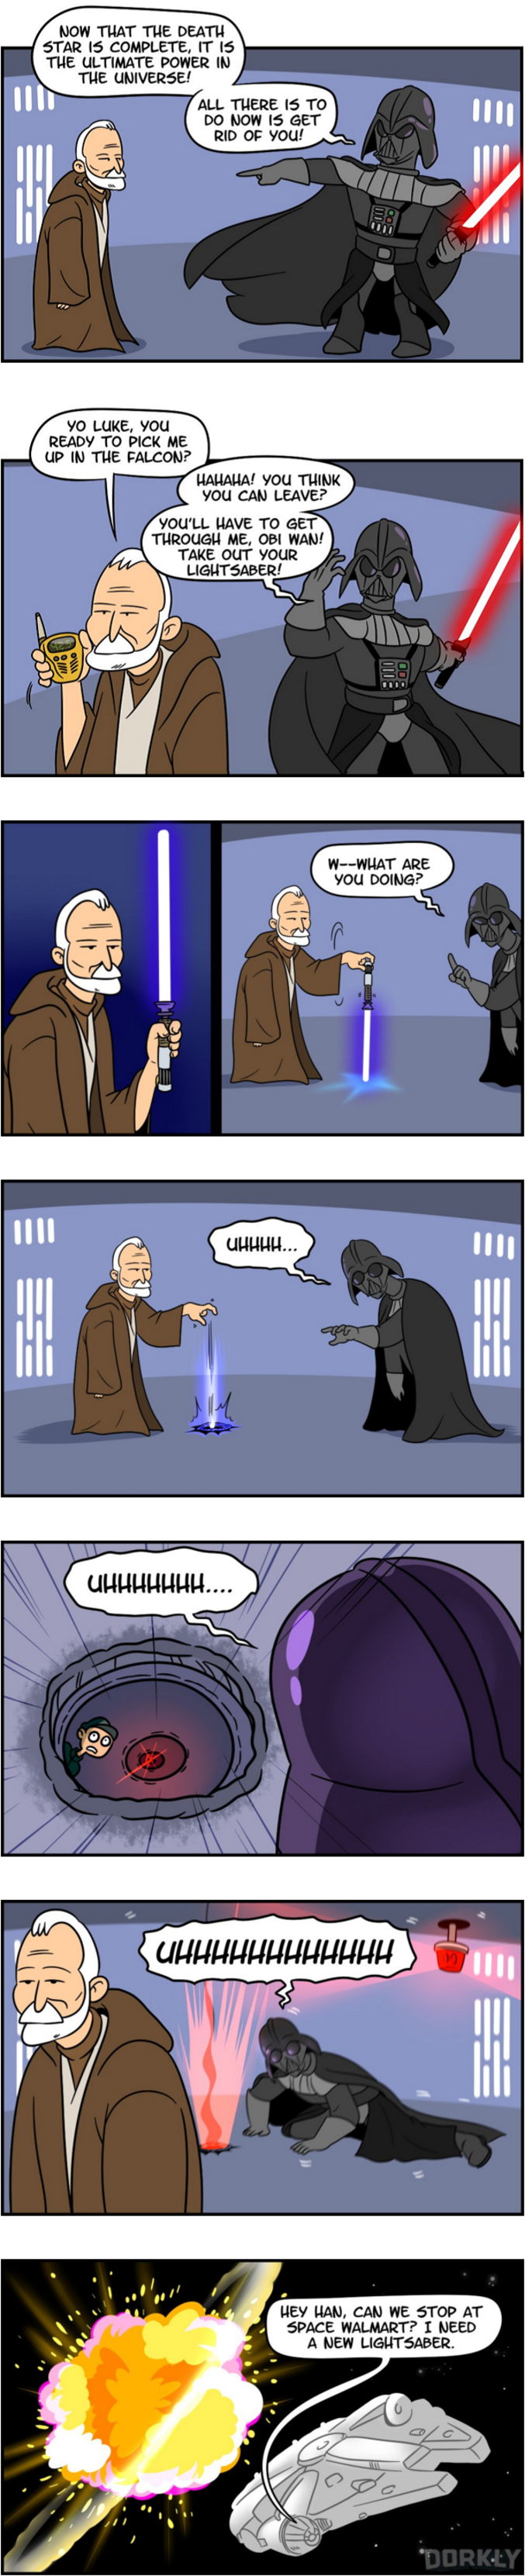 Voici le lien vers les comics :

http://www.dorkly.com/post/76692/star-wars-a-new-hope-could-have-been-handled-in-5-seconds?ref=comics